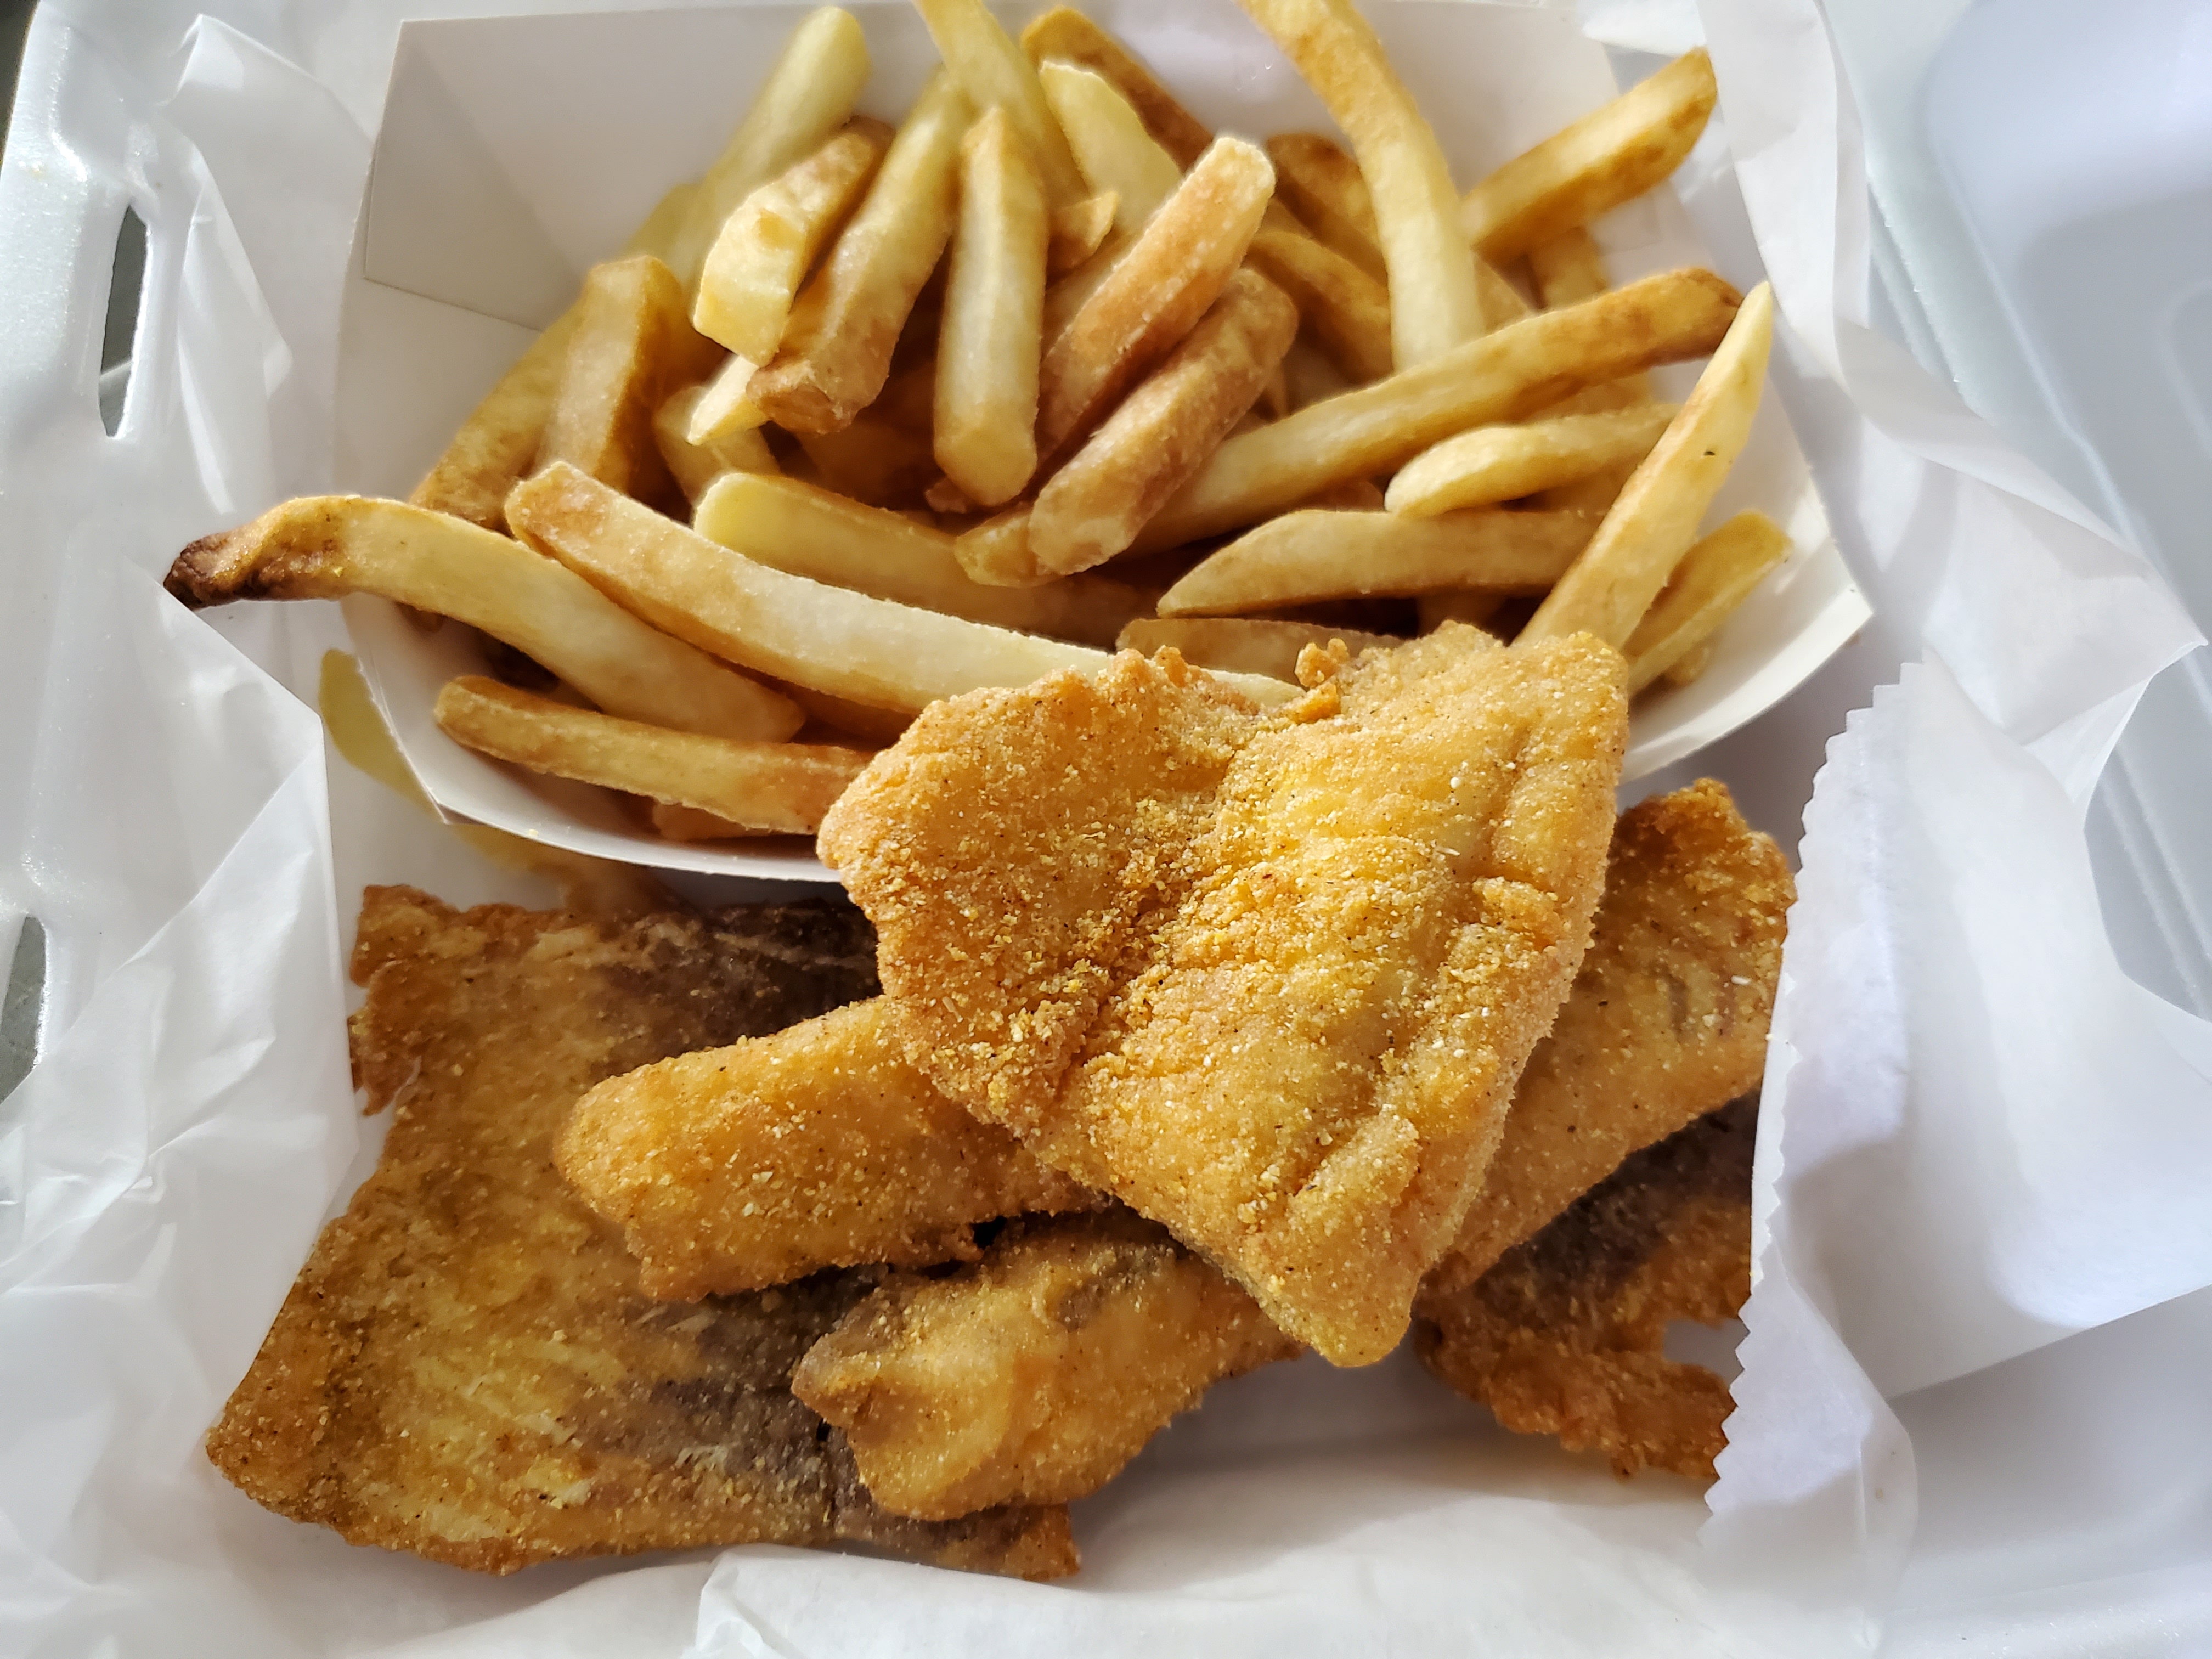 Fried Fish and Chip